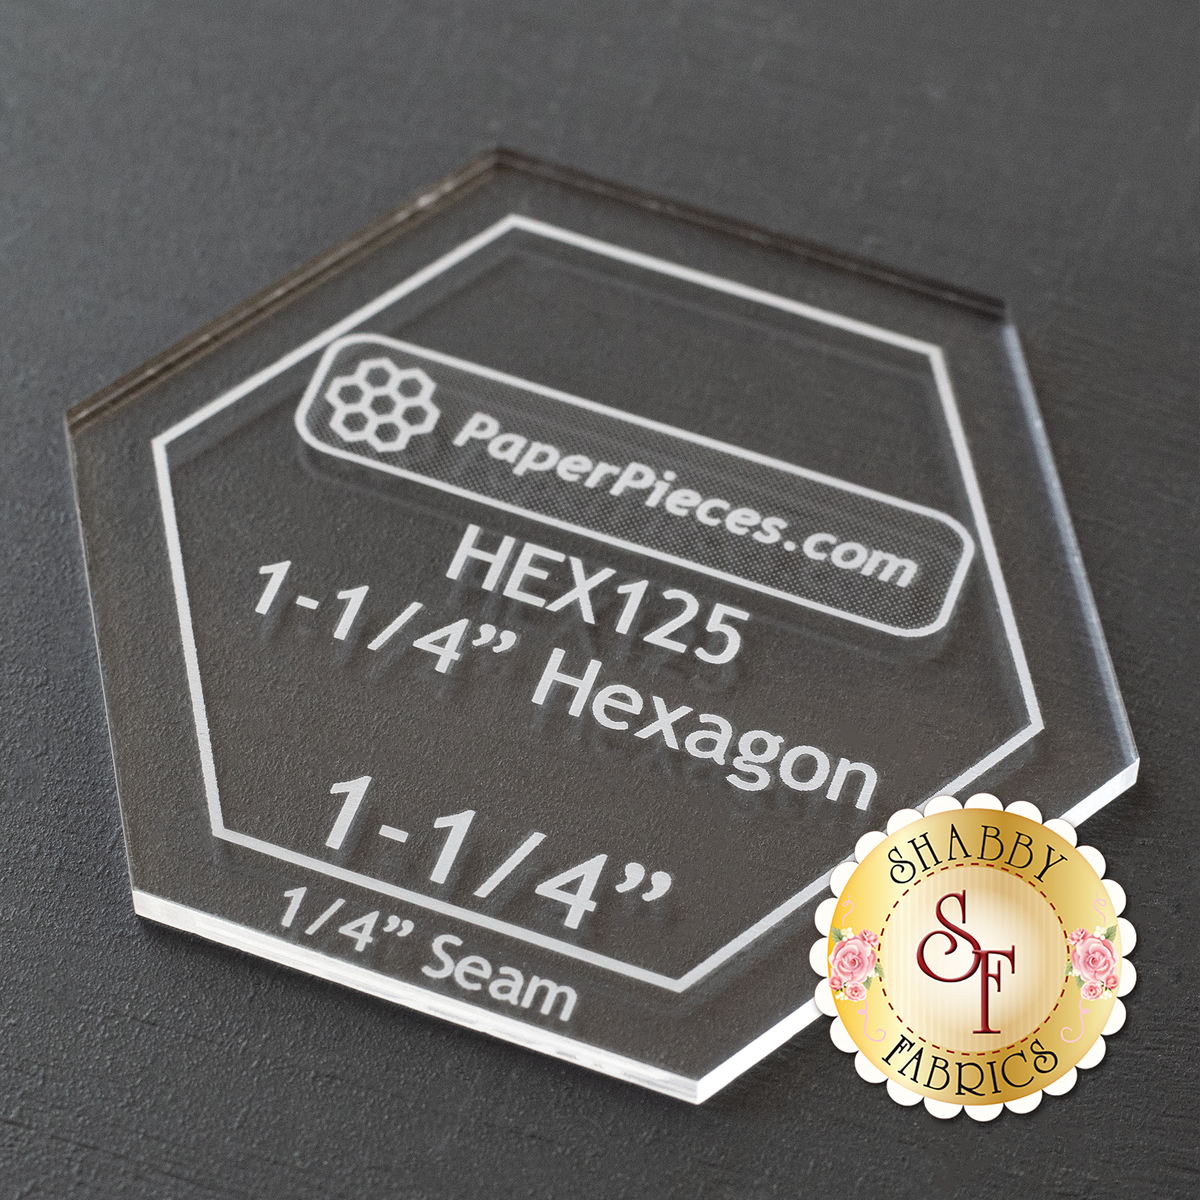 Hexagon Quilting Template Set, 4 inch, 3 inch, 2 inch, 1 inch with 1/4 inch Seam Allowance